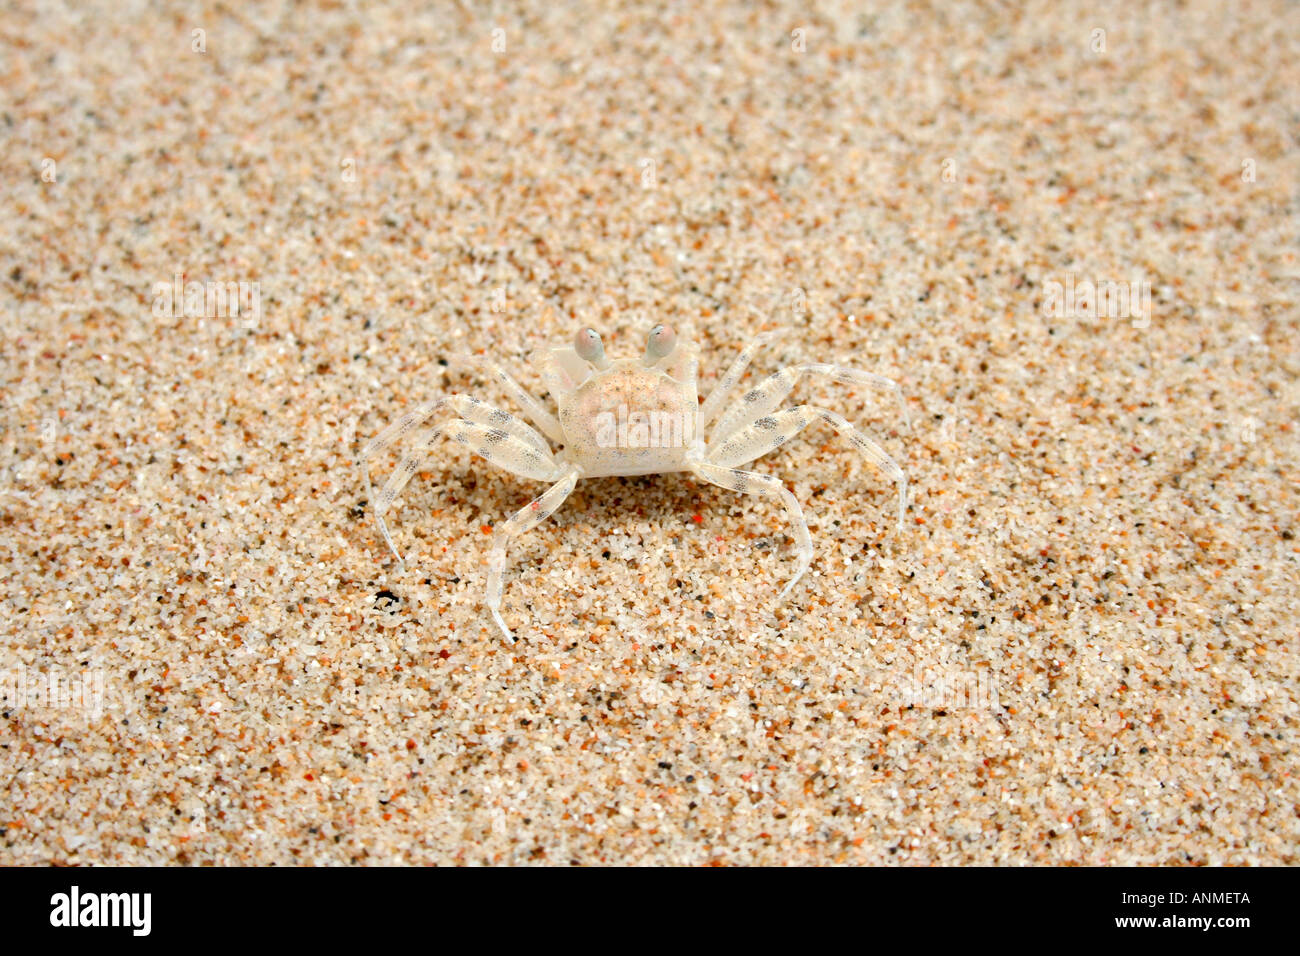 Close up of a crab with transparent shell on the white beach sands of Jolly buoy Andaman Stock Photo